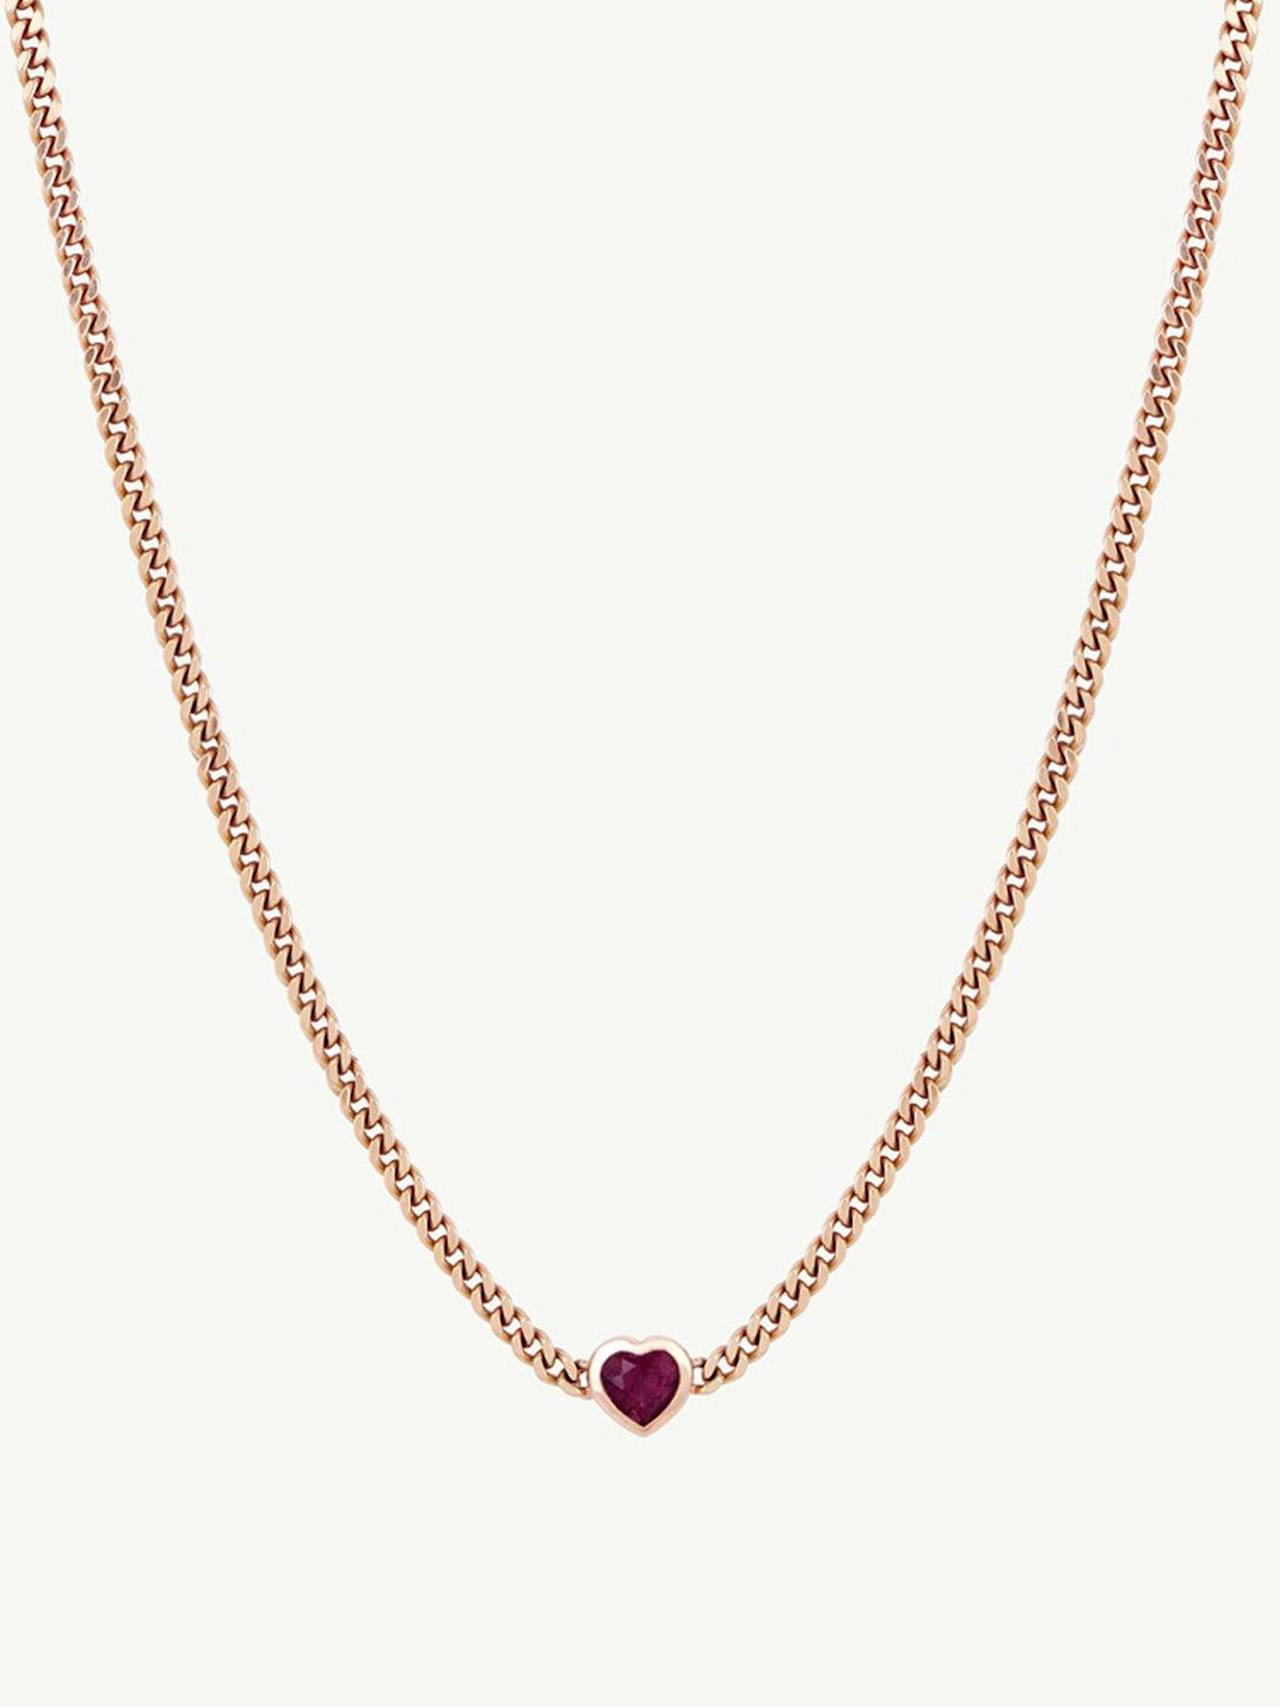 Charlotte's heart necklace